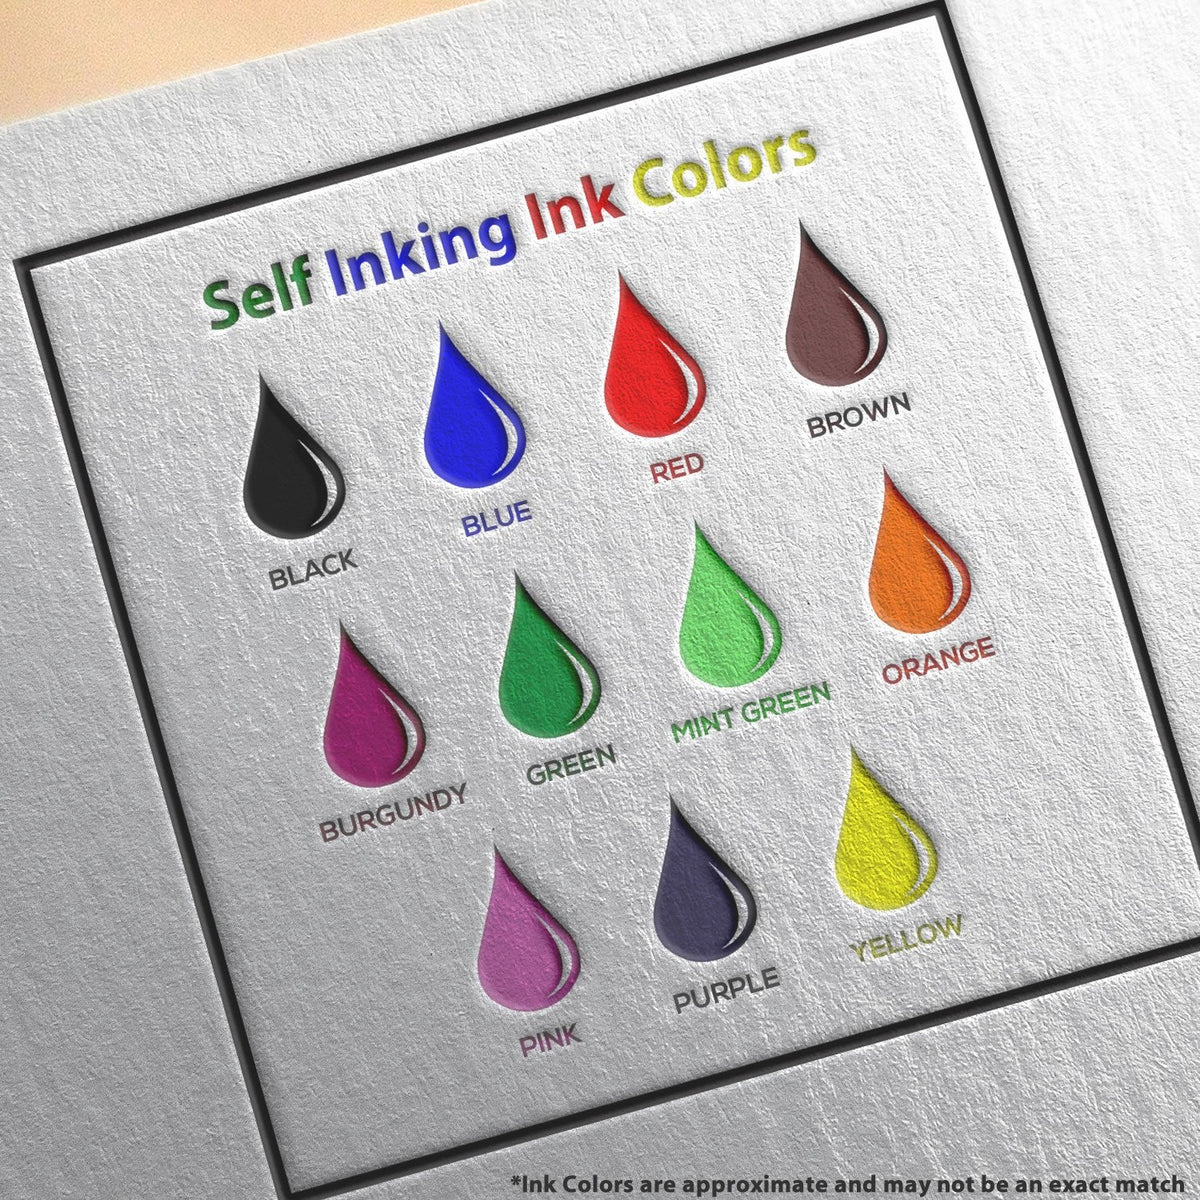 Self-Inking Magical Work Stamp Ink Color Options